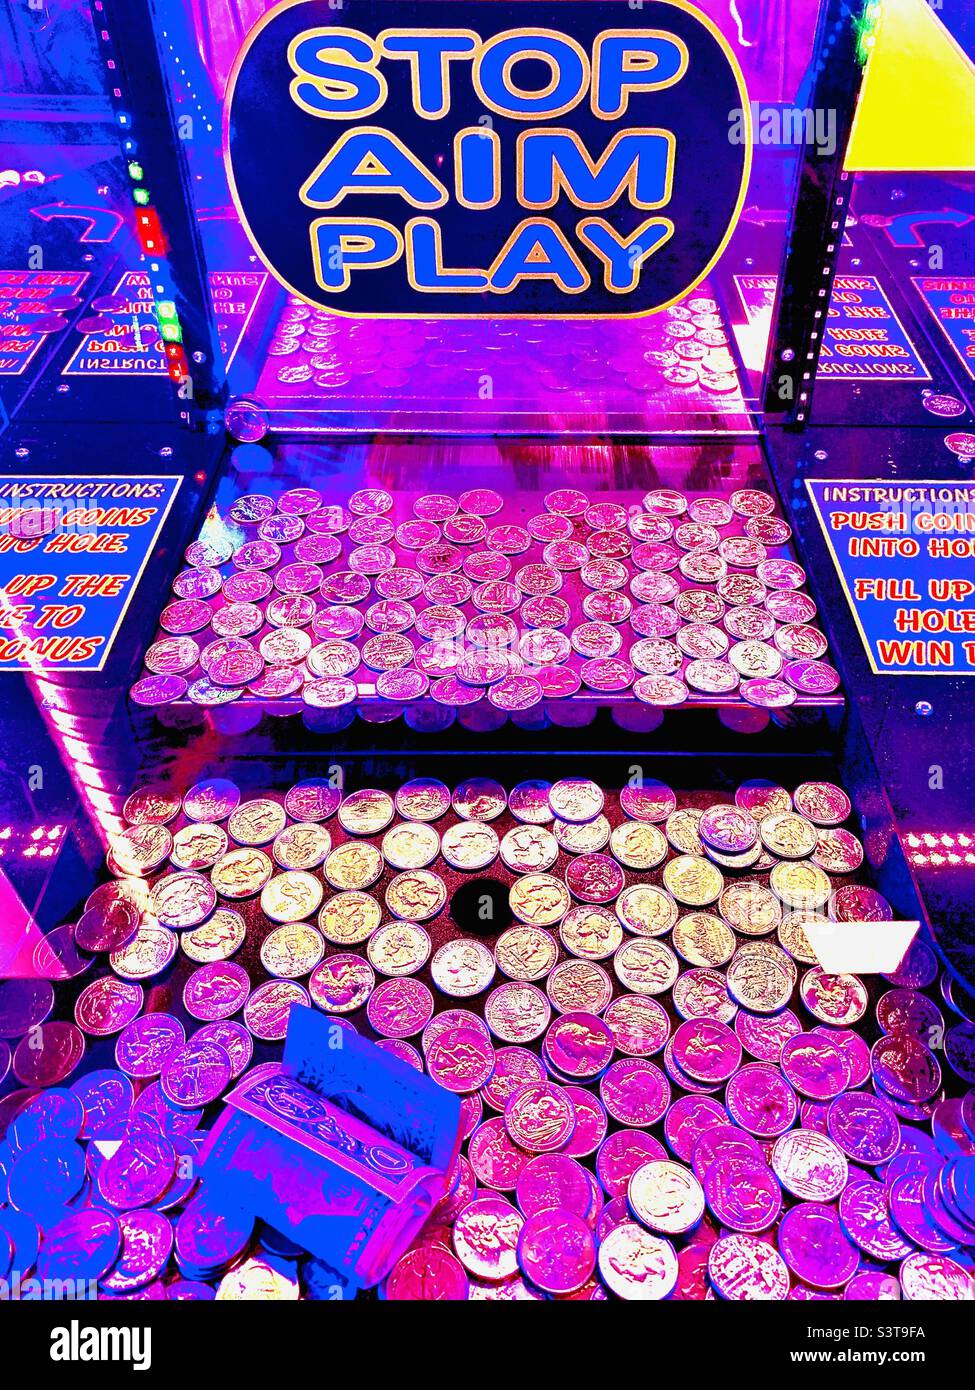 Slot machine game with purple tint, full of quarters Stock Photo